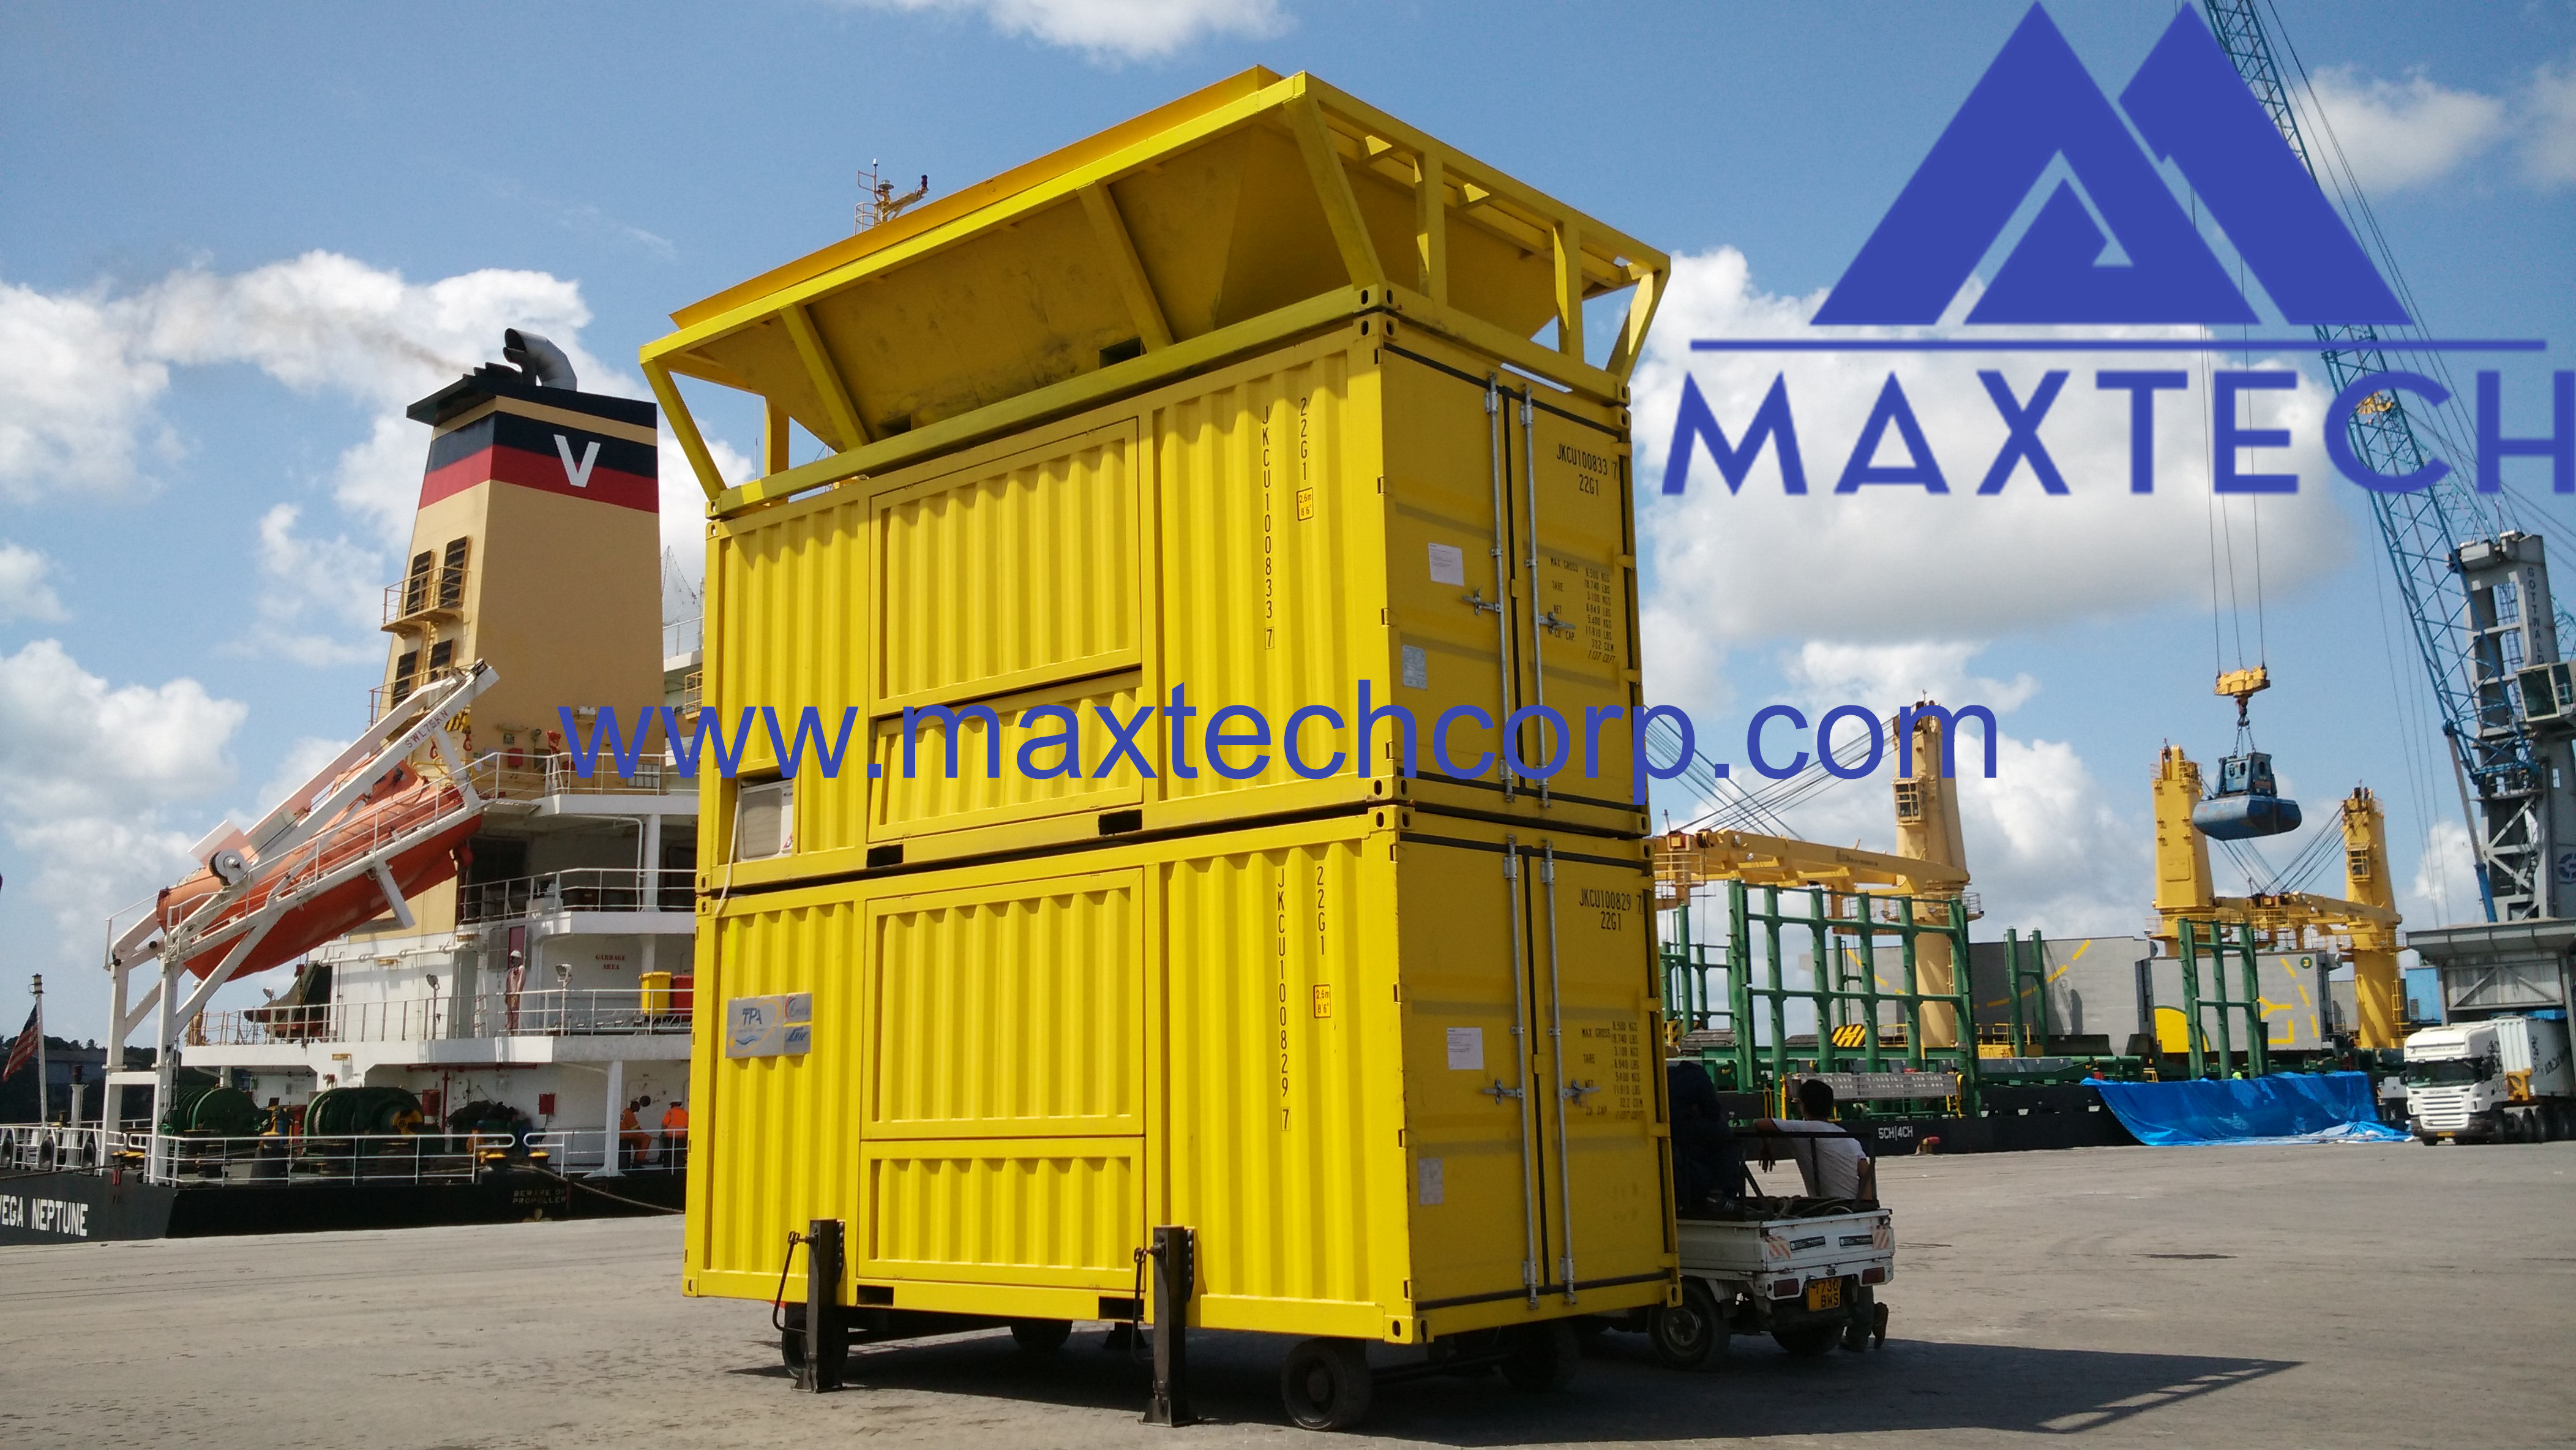 50/100kgⅠⅠ-PD Weighing and Bagging Machine In Mobile Container